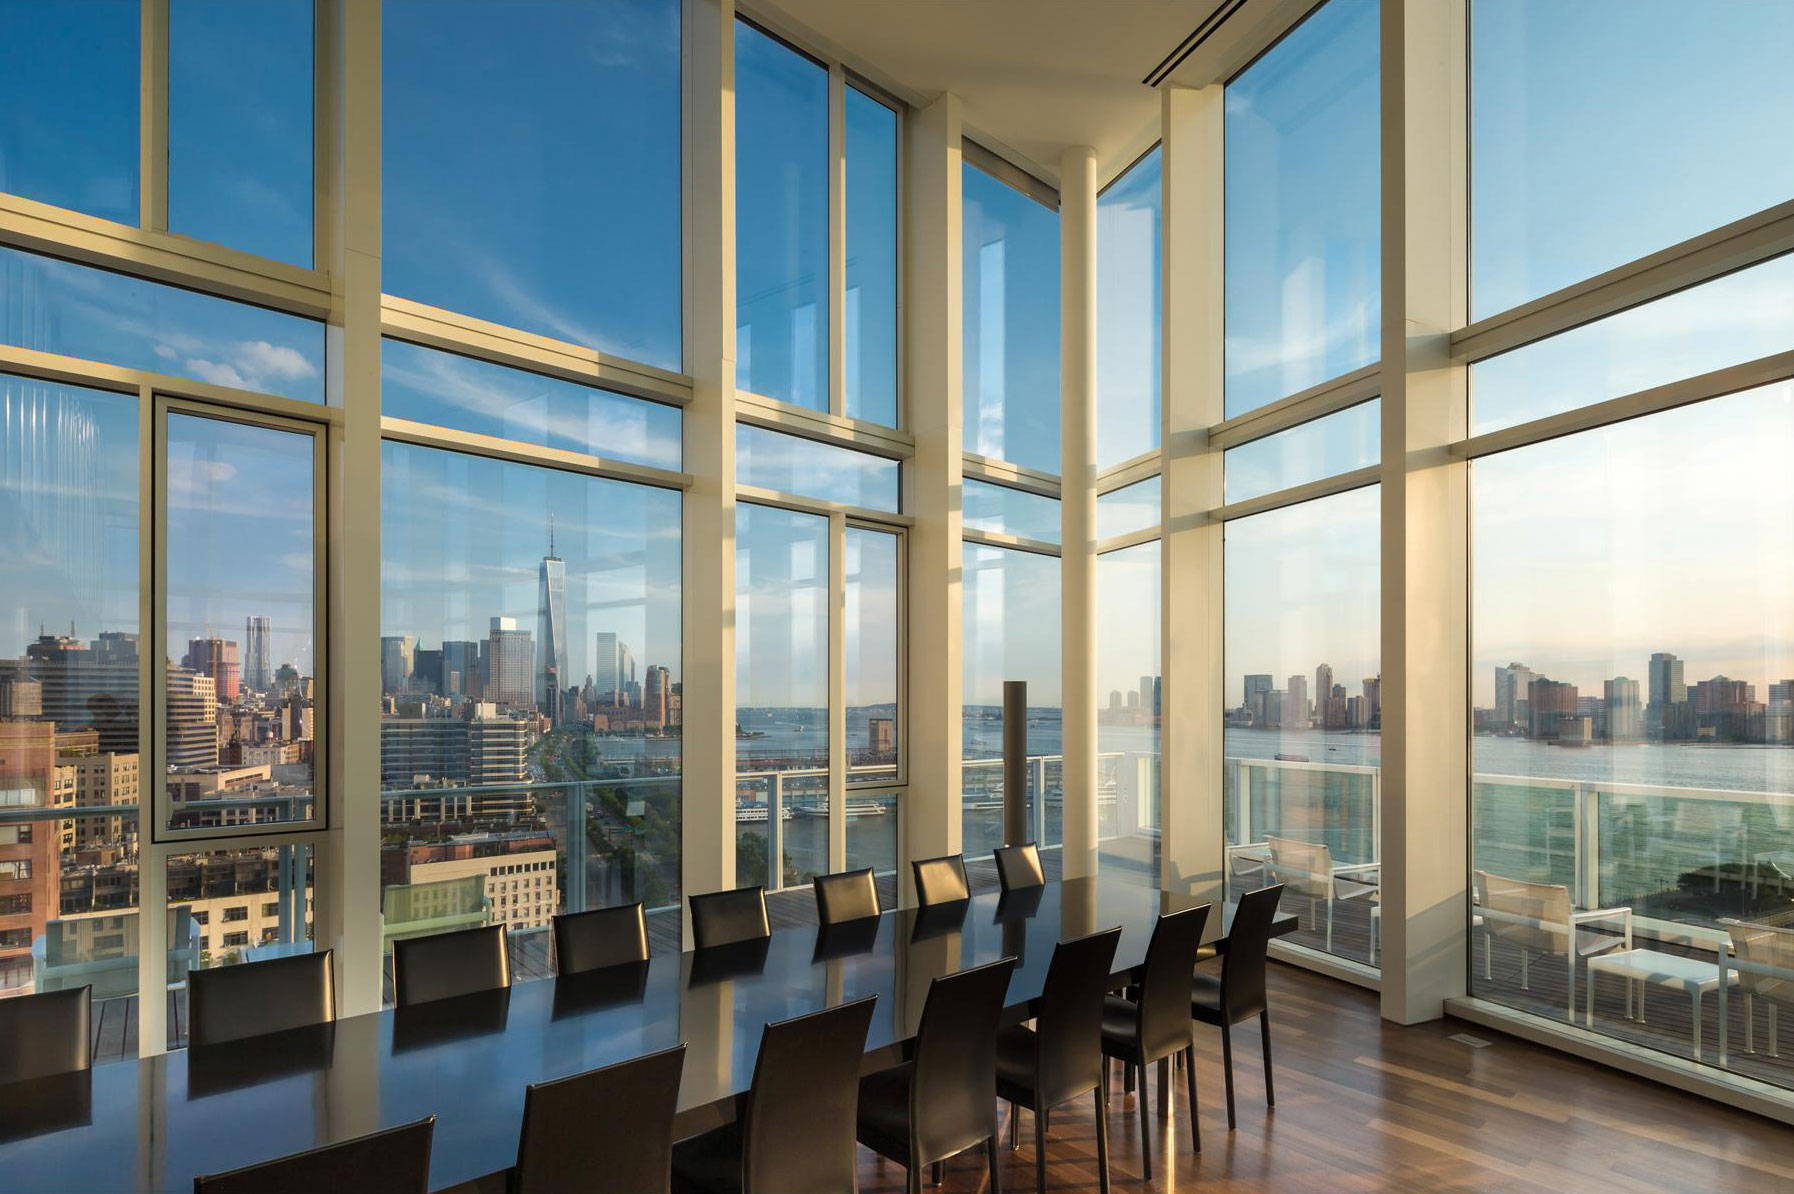 How to Buy Commercial Real Estate in NYC